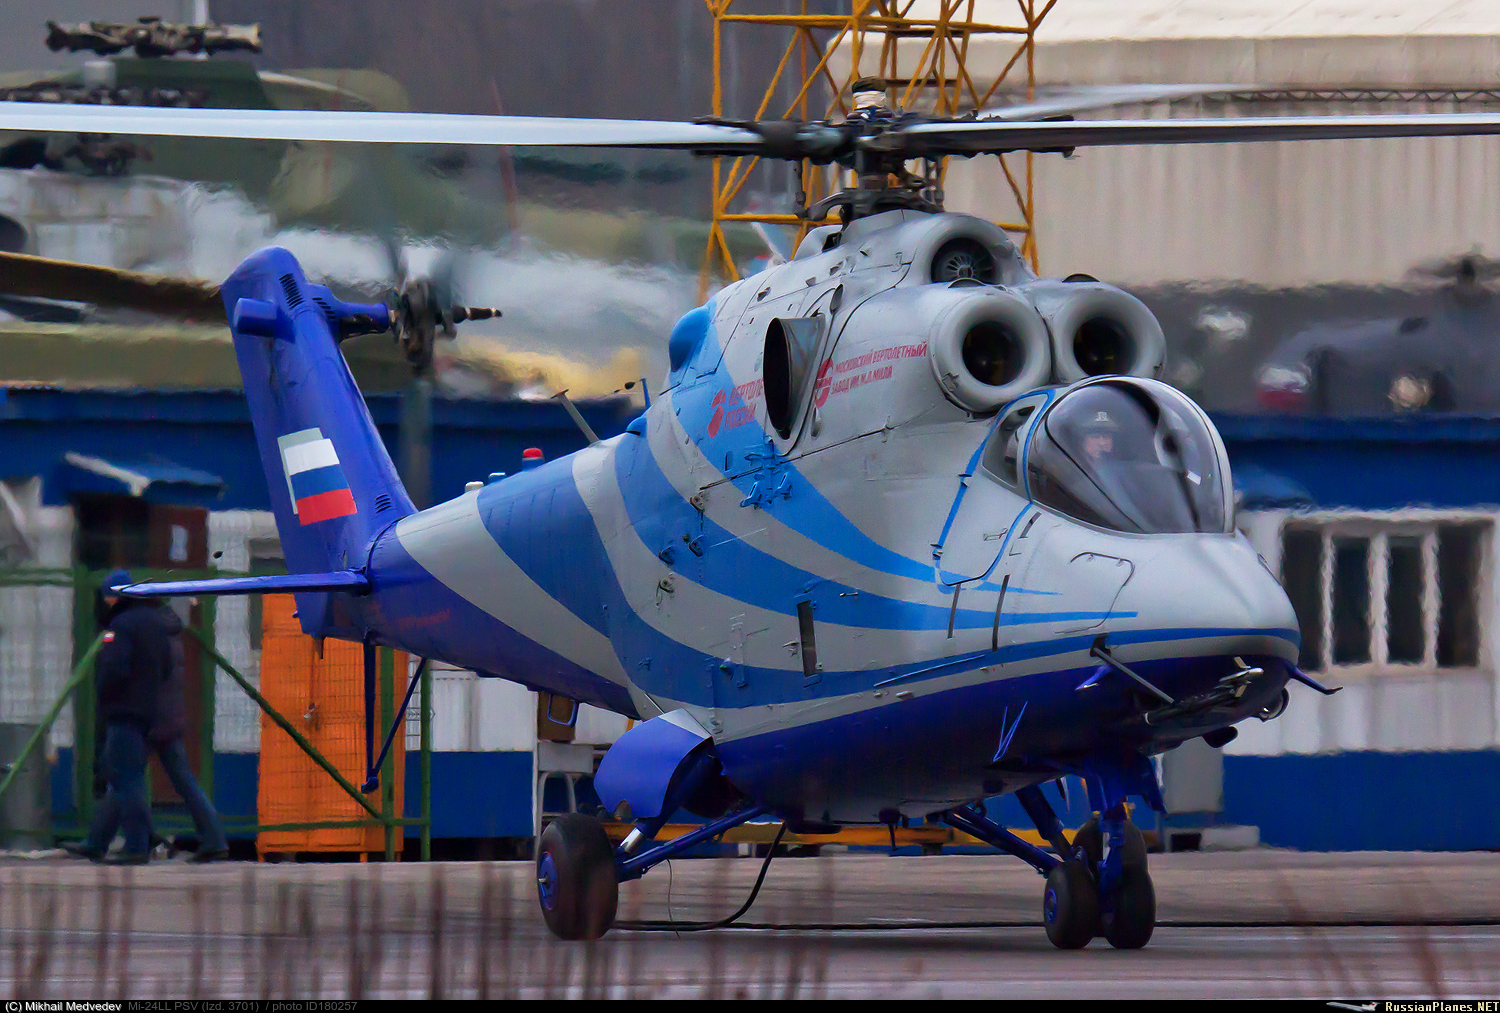 http://russianplanes.net/images/to181000/180257.jpg